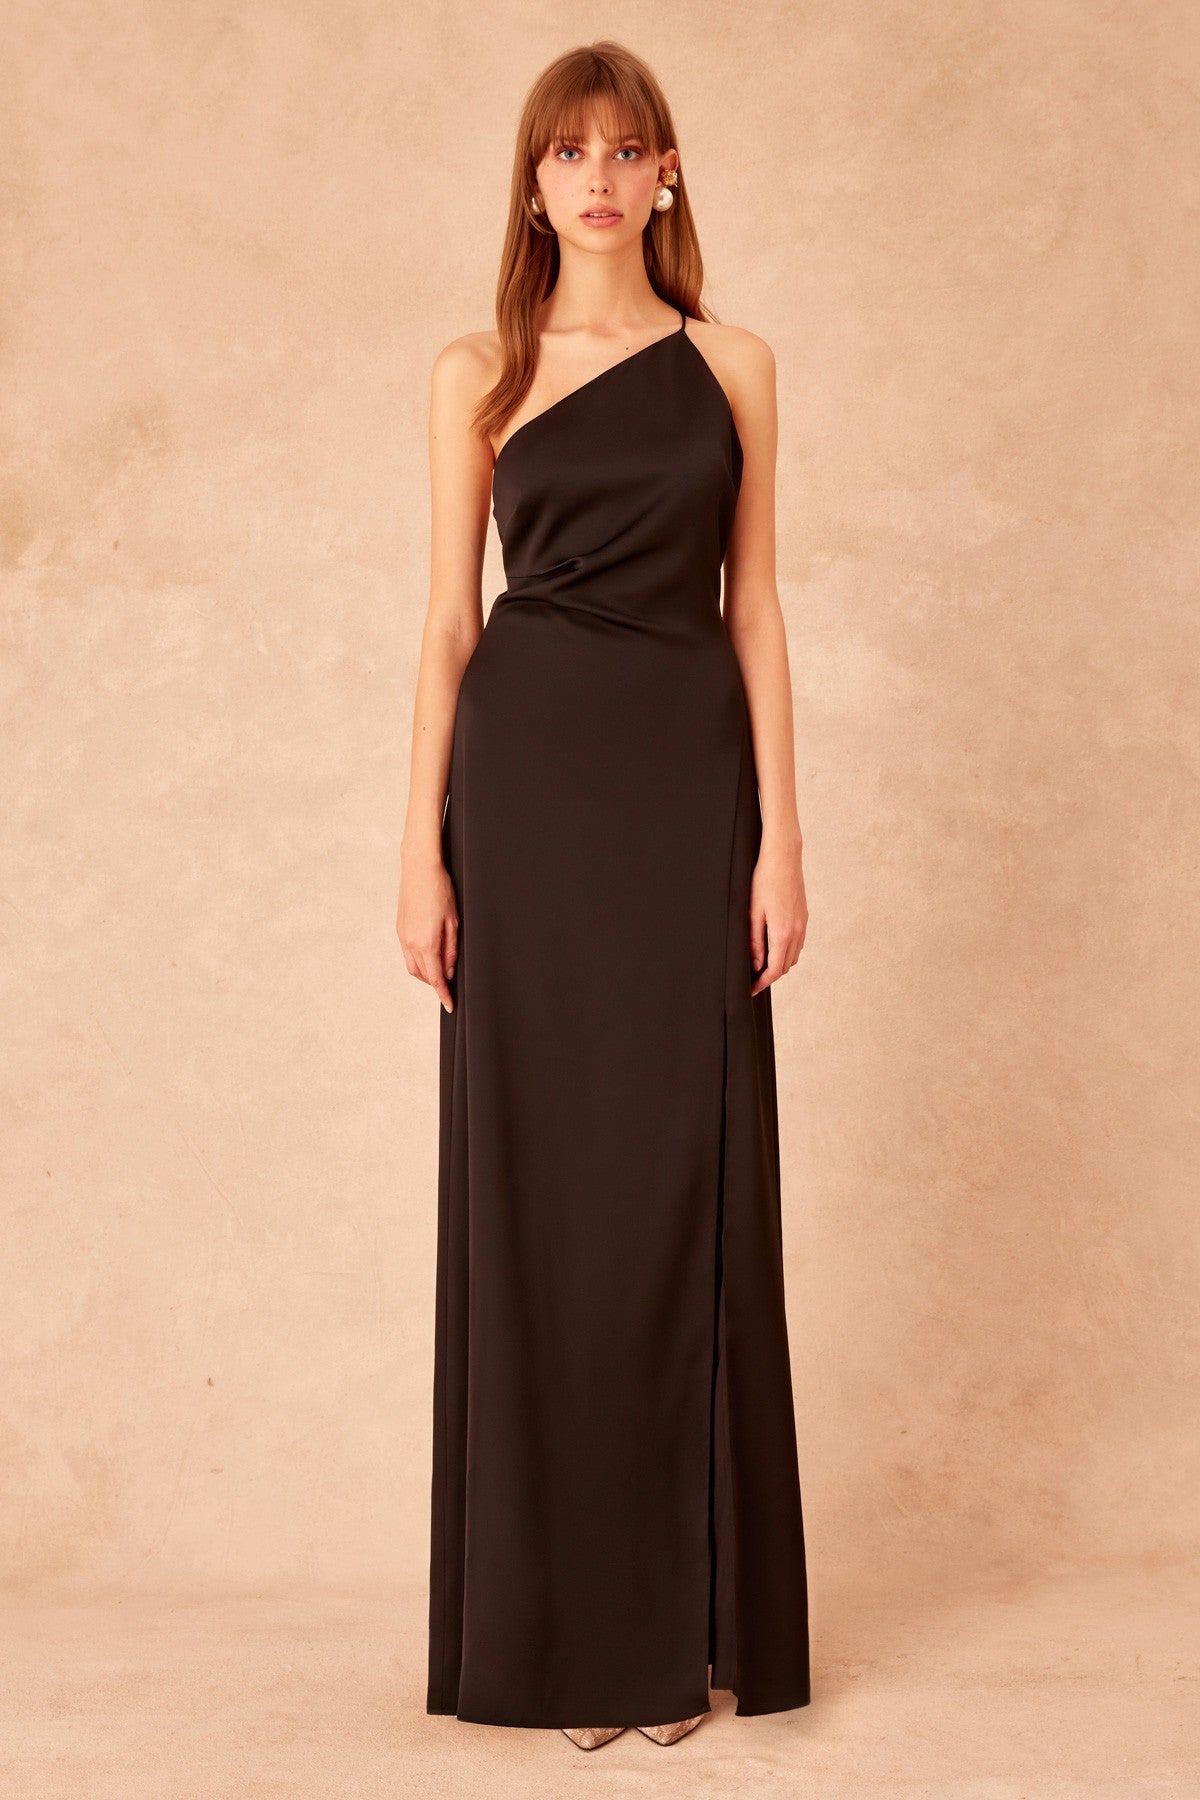 Buy Keepsake the Label Captivating Gown now at Smoke and Mirrors Boutique. Shop Keepsake the Label Free Shipping. Shop Keepsake the Label ZipPay. Shop Keepsake the Label AfterPay. 